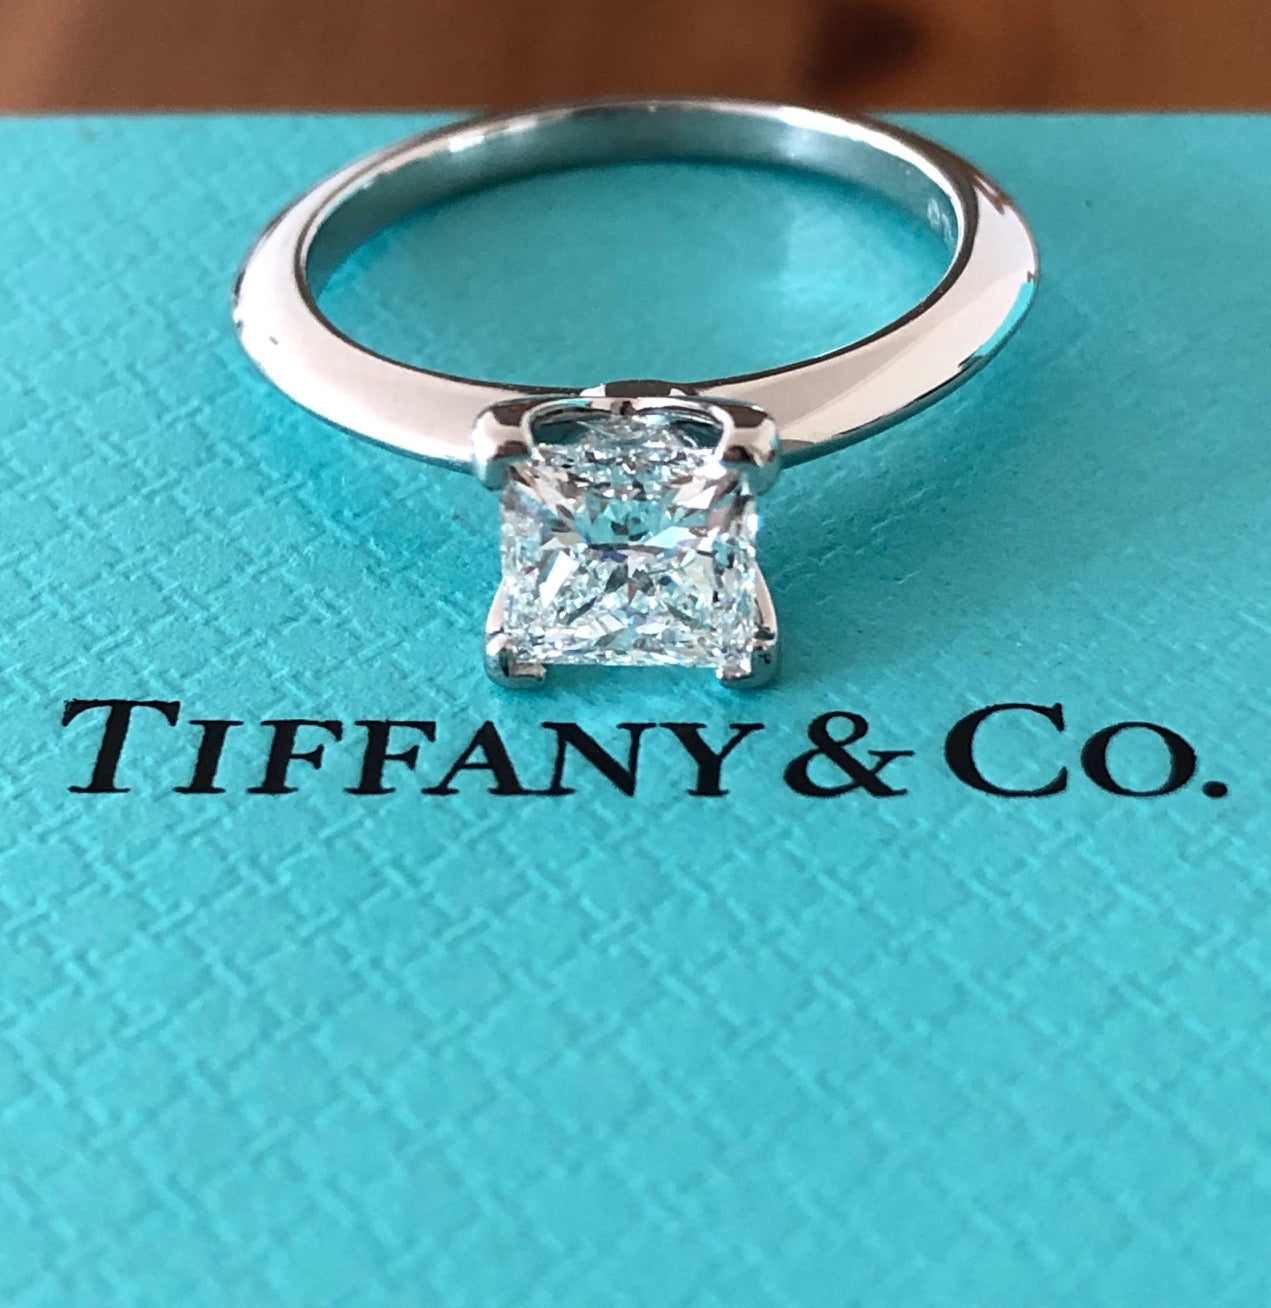 Pre-Owned Tiffany Engagement Rings in Boca Raton: Tiffany & Co Review